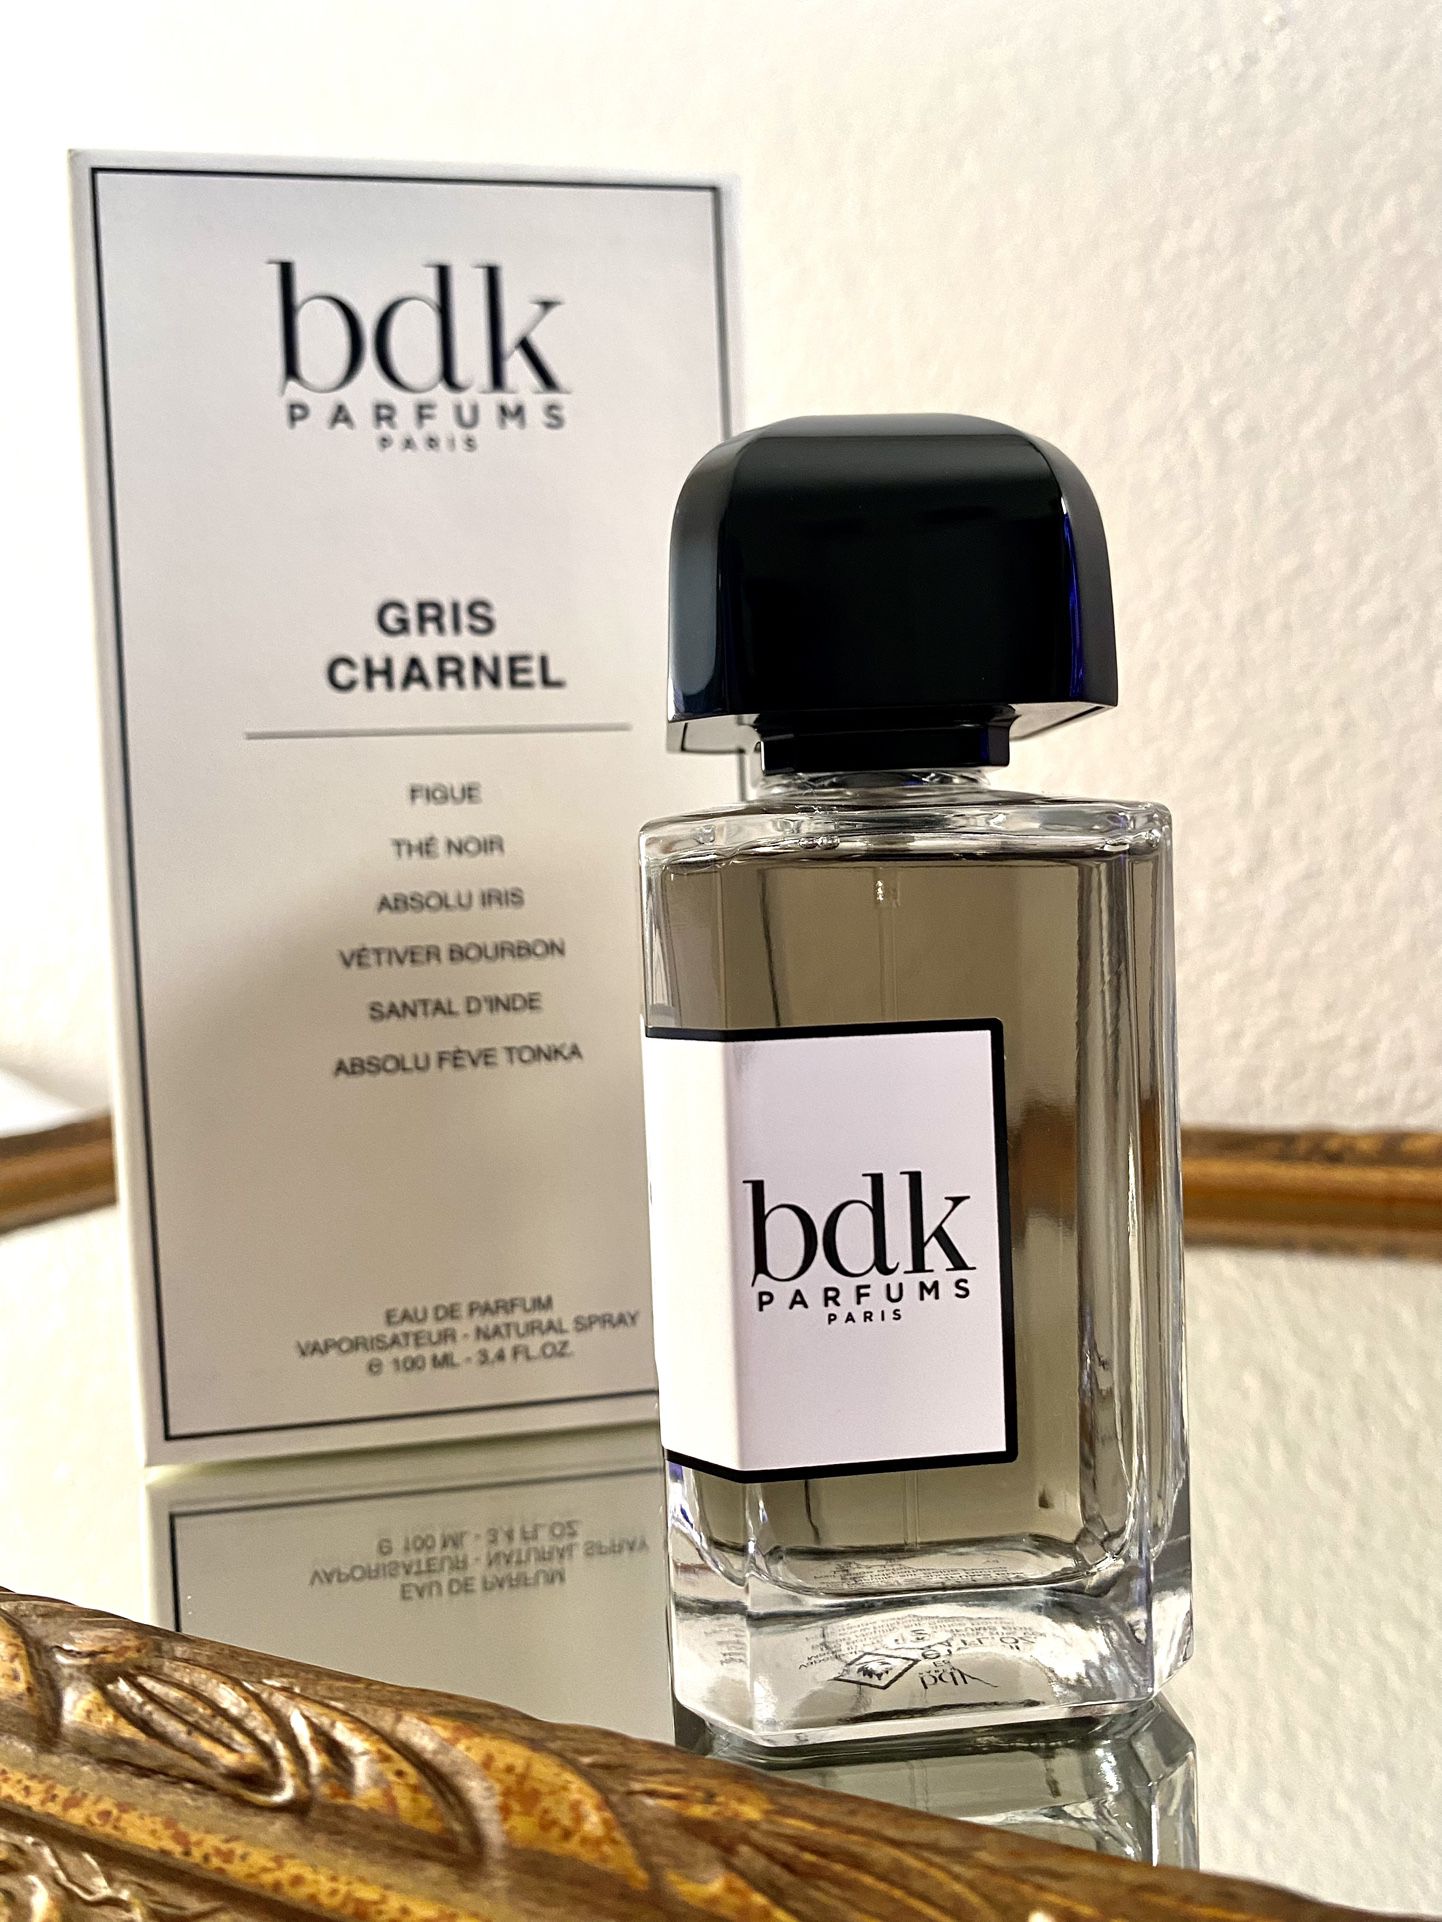 BDK Gris Charnel for Sale in South Gate, CA - OfferUp